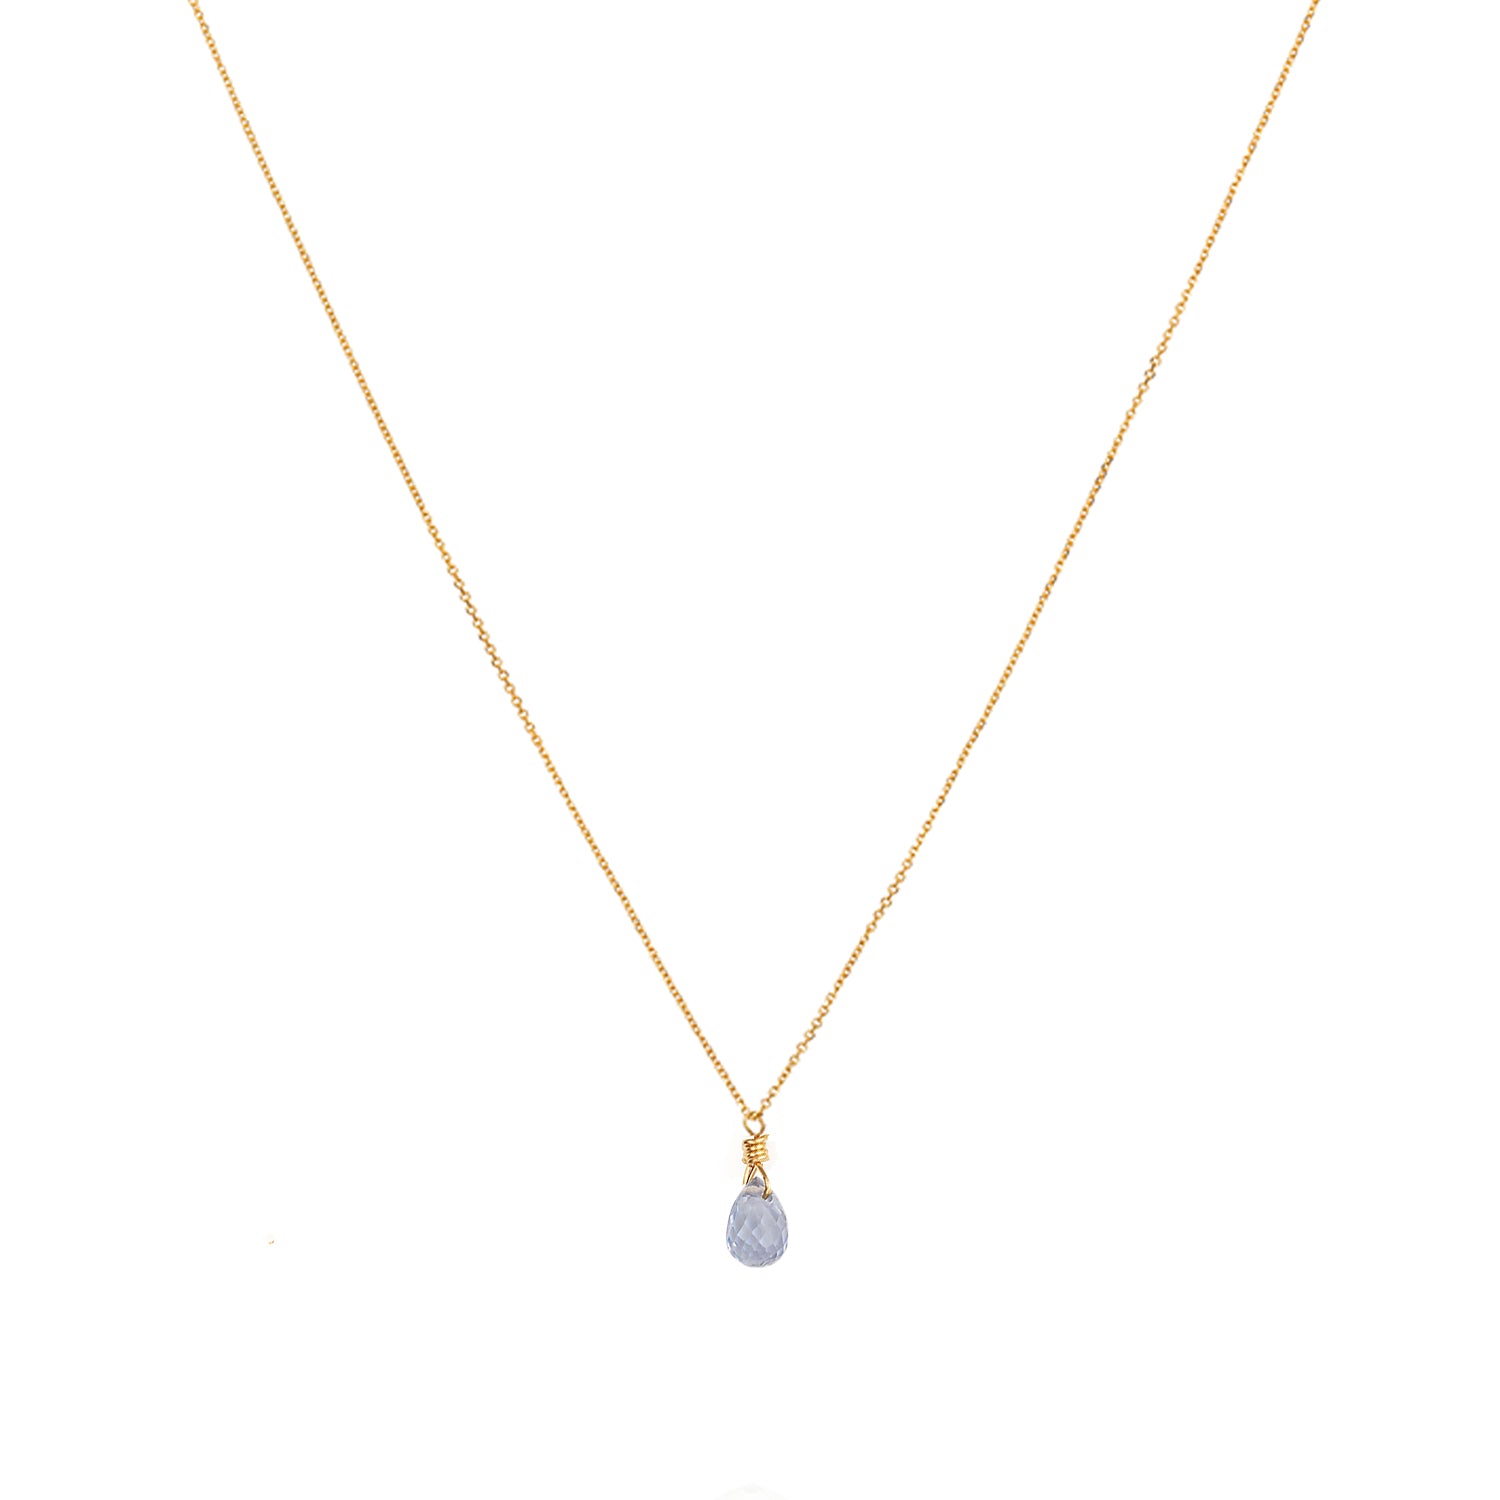 18ct yellow gold chain necklace with cornflower blue sapphire briolette drop